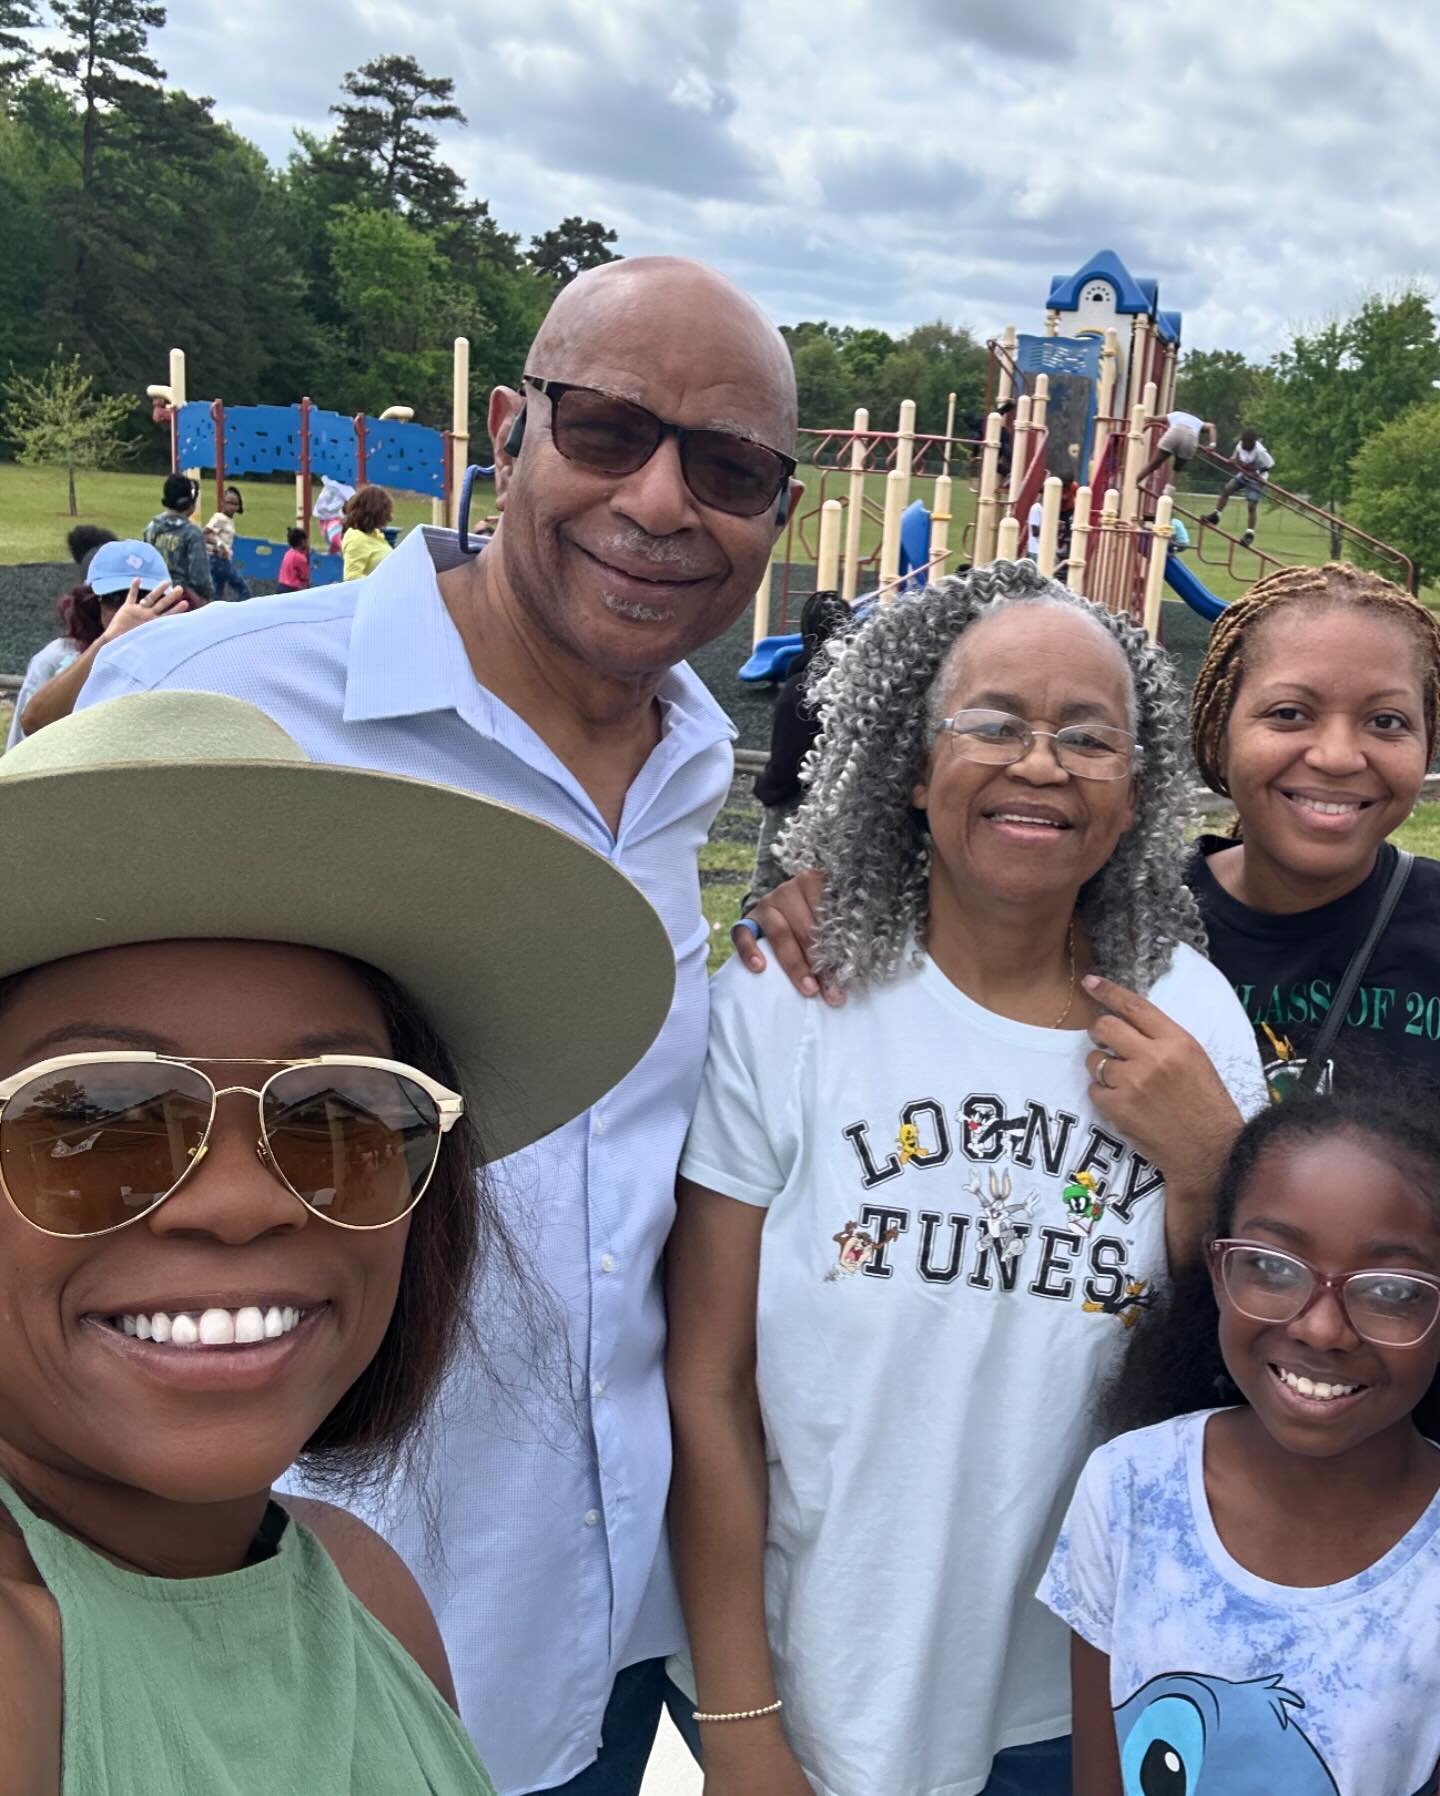 I had an amazing time at the community Easter Egg Hunt this weekend! It was especially important that I spend Good Friday surrounded by my family and friends, cherishing every moment together. Then, on Easter Sunday, I was humbled by God&rsquo;s favo